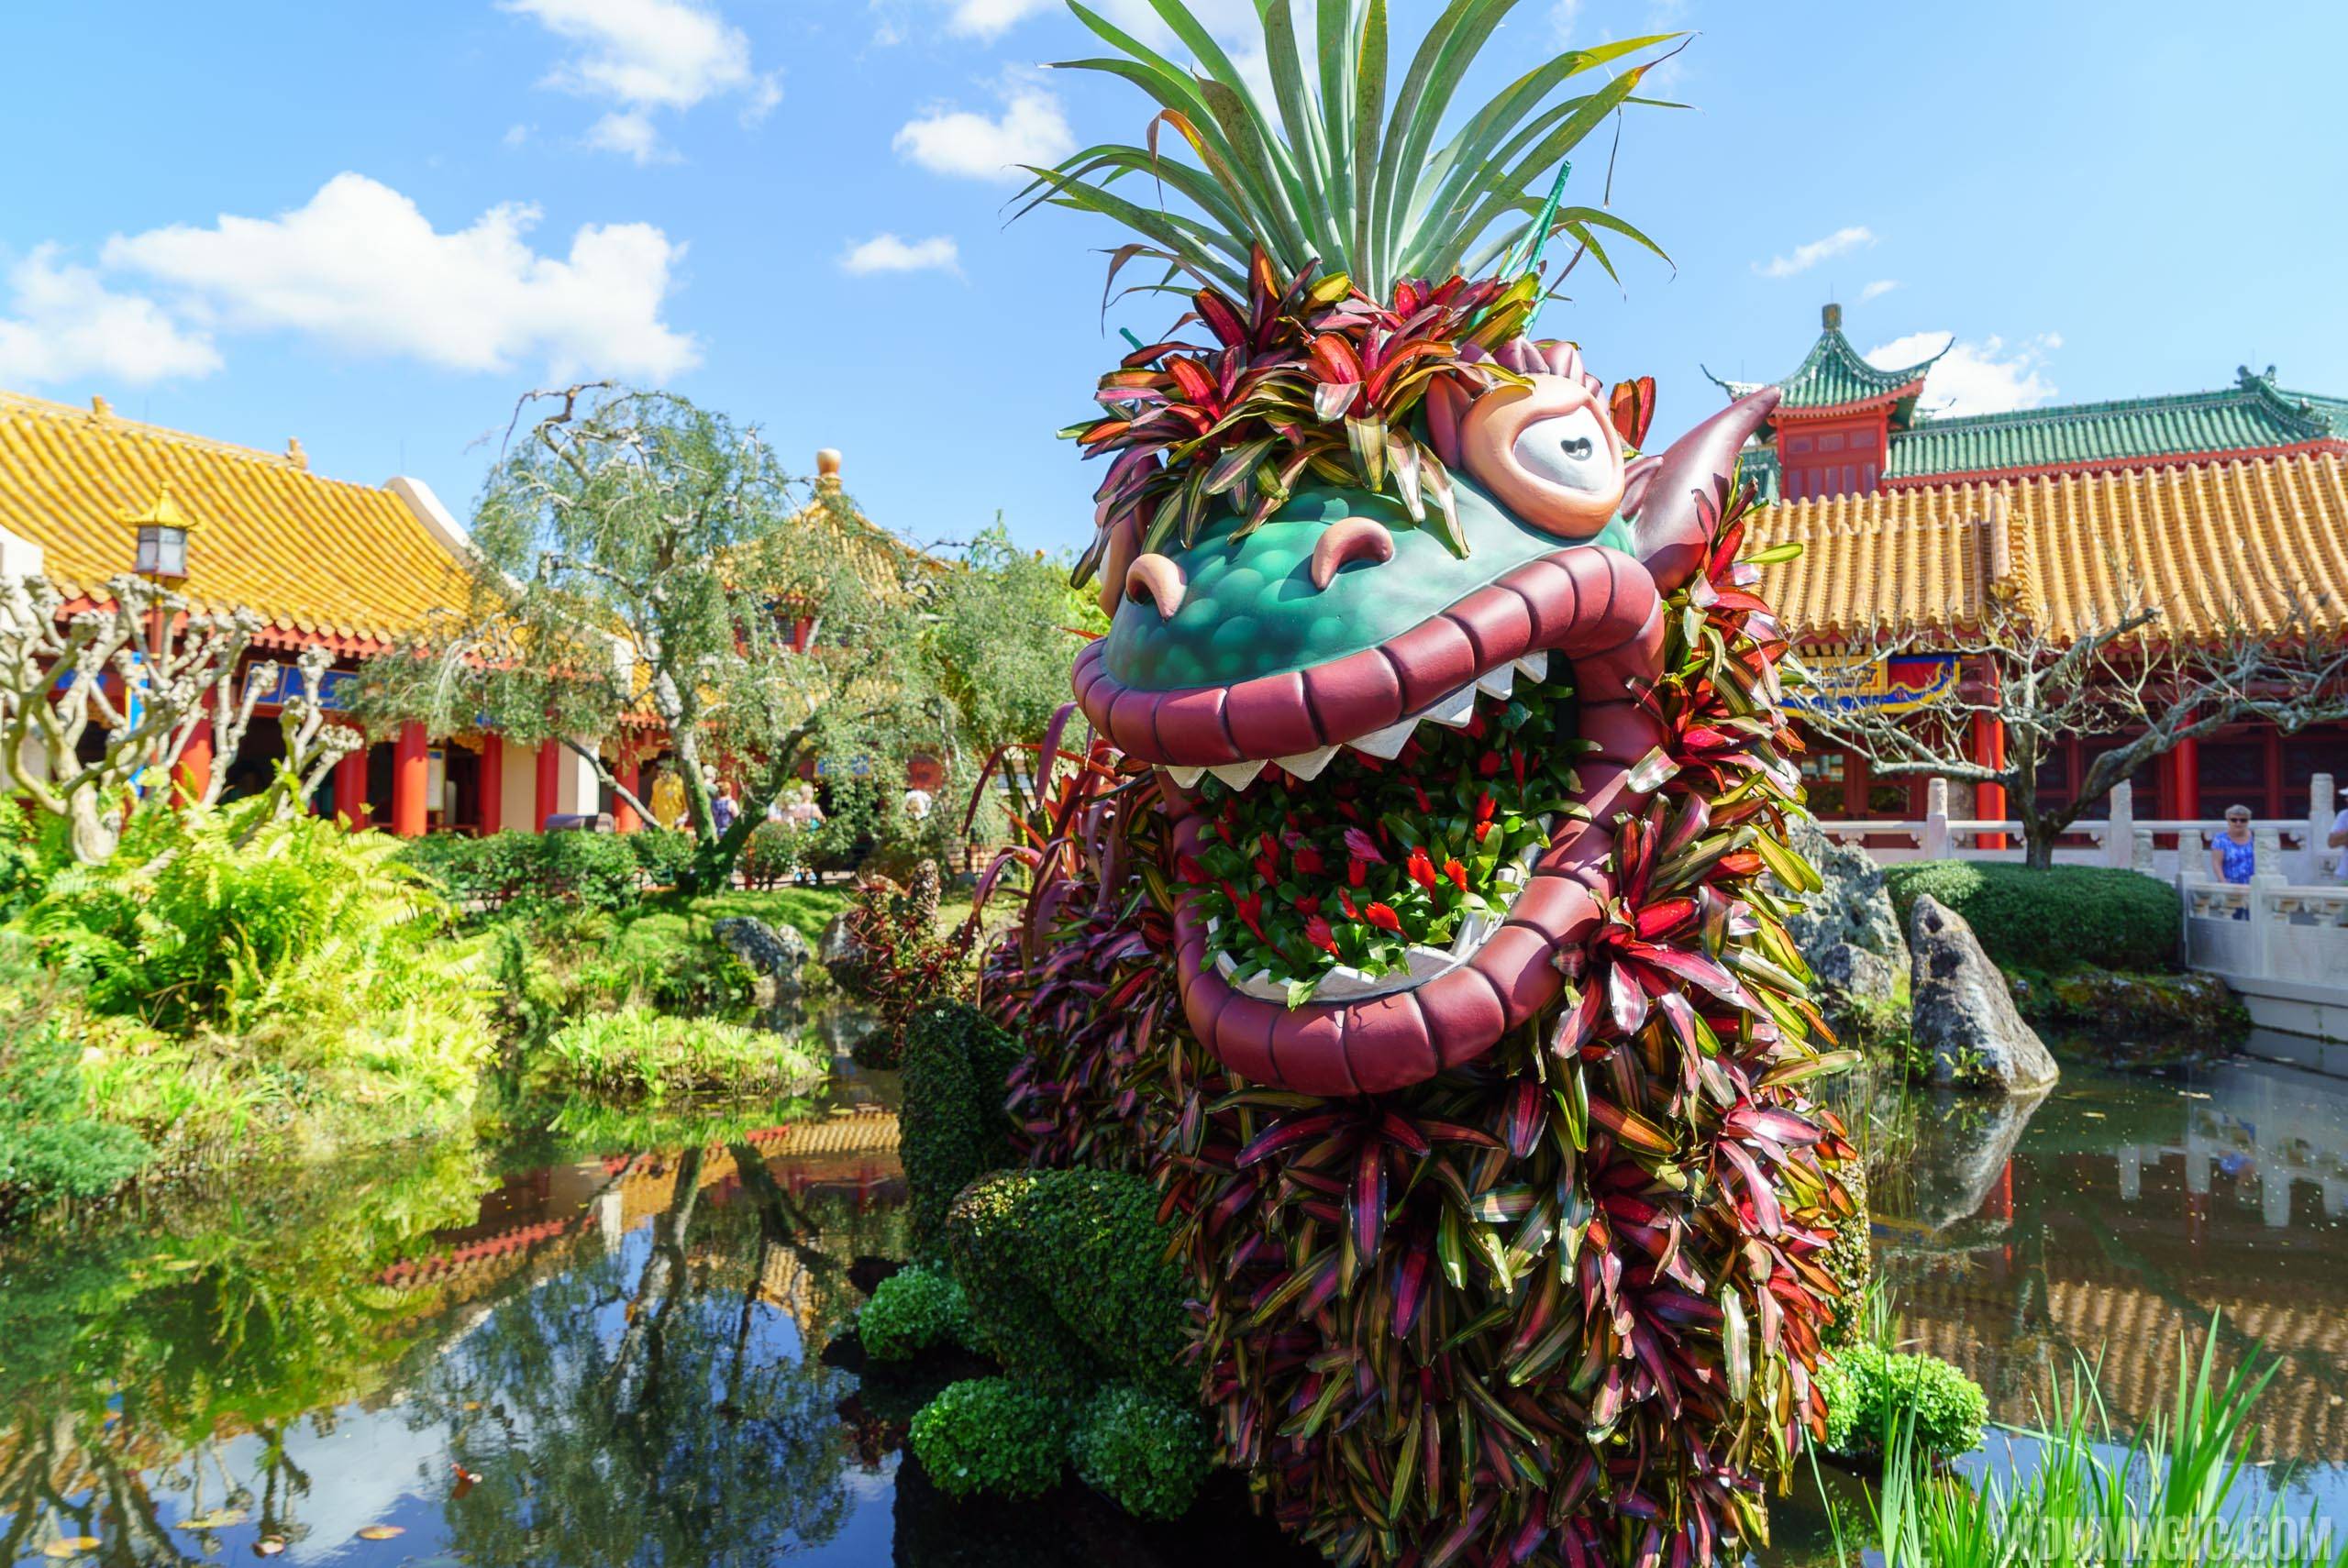 2016 Epcot International Flower and Garden Festival - Dragon in the China Pavilion